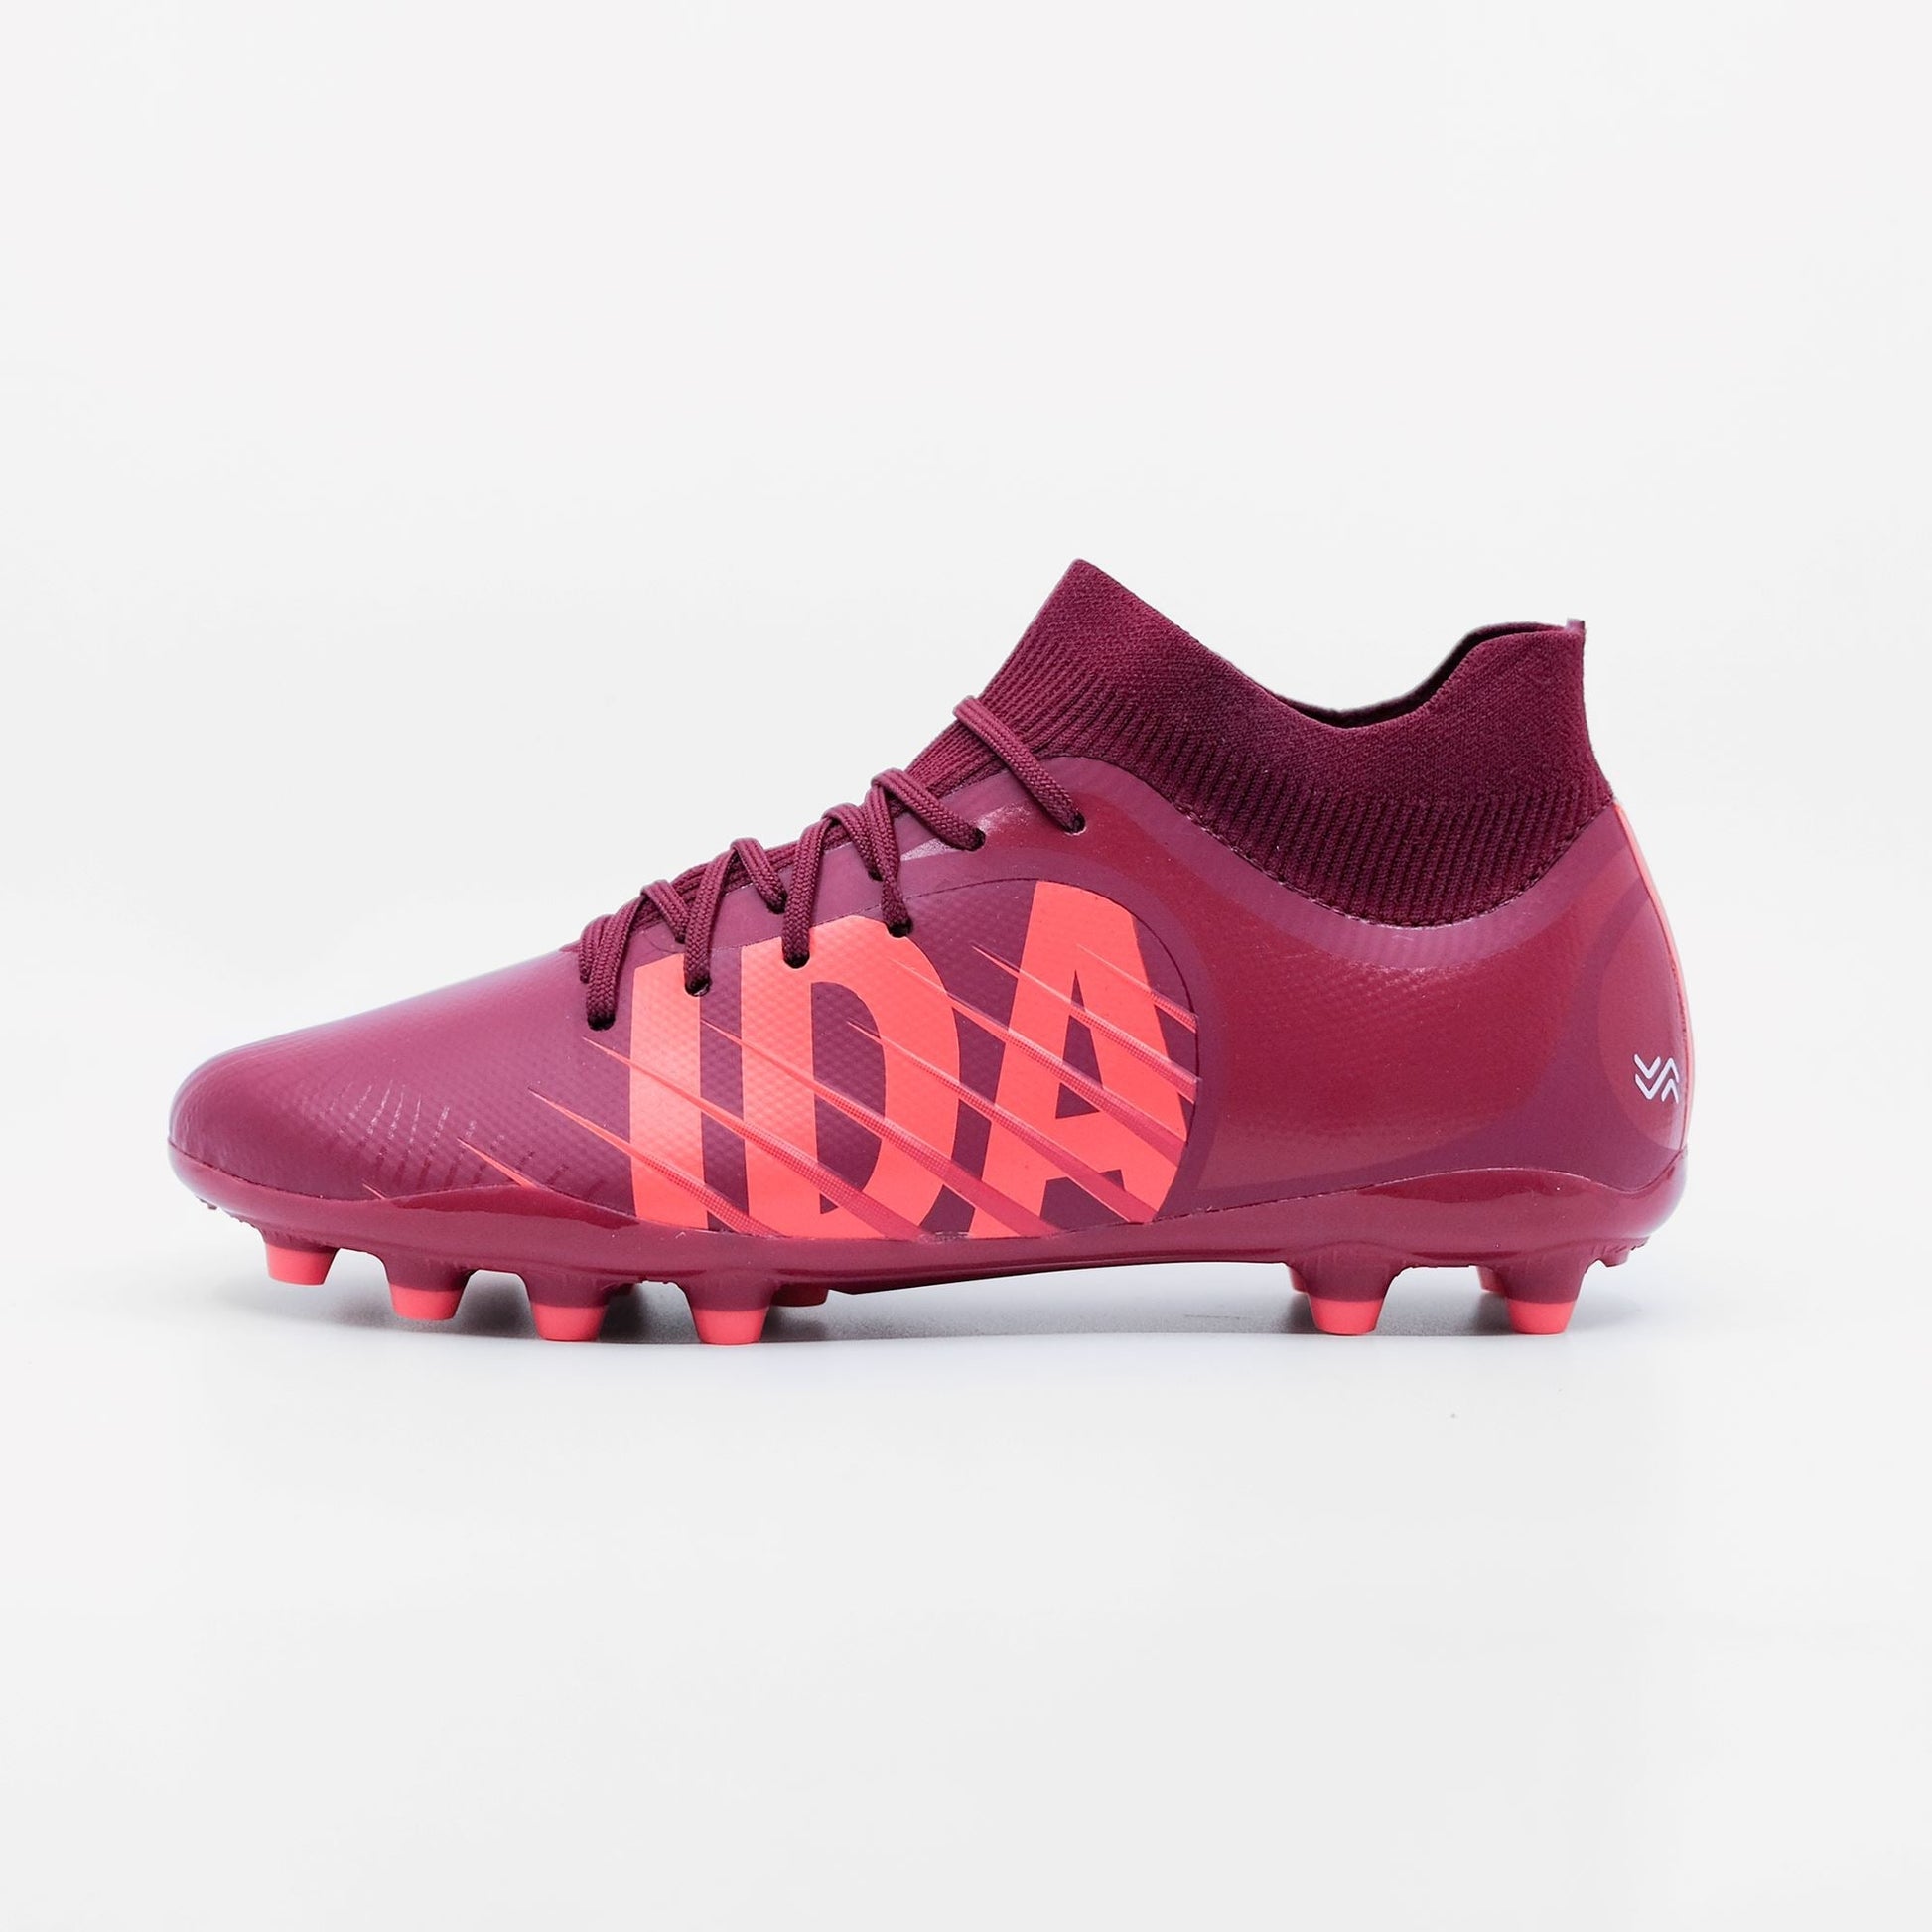 IDA Rise Women's Soccer Cleat, Burgundy, FG/AG, Firm Ground, Artificial Ground, Ankle sock, coral I-D-A in big letters on the outside of the cleat